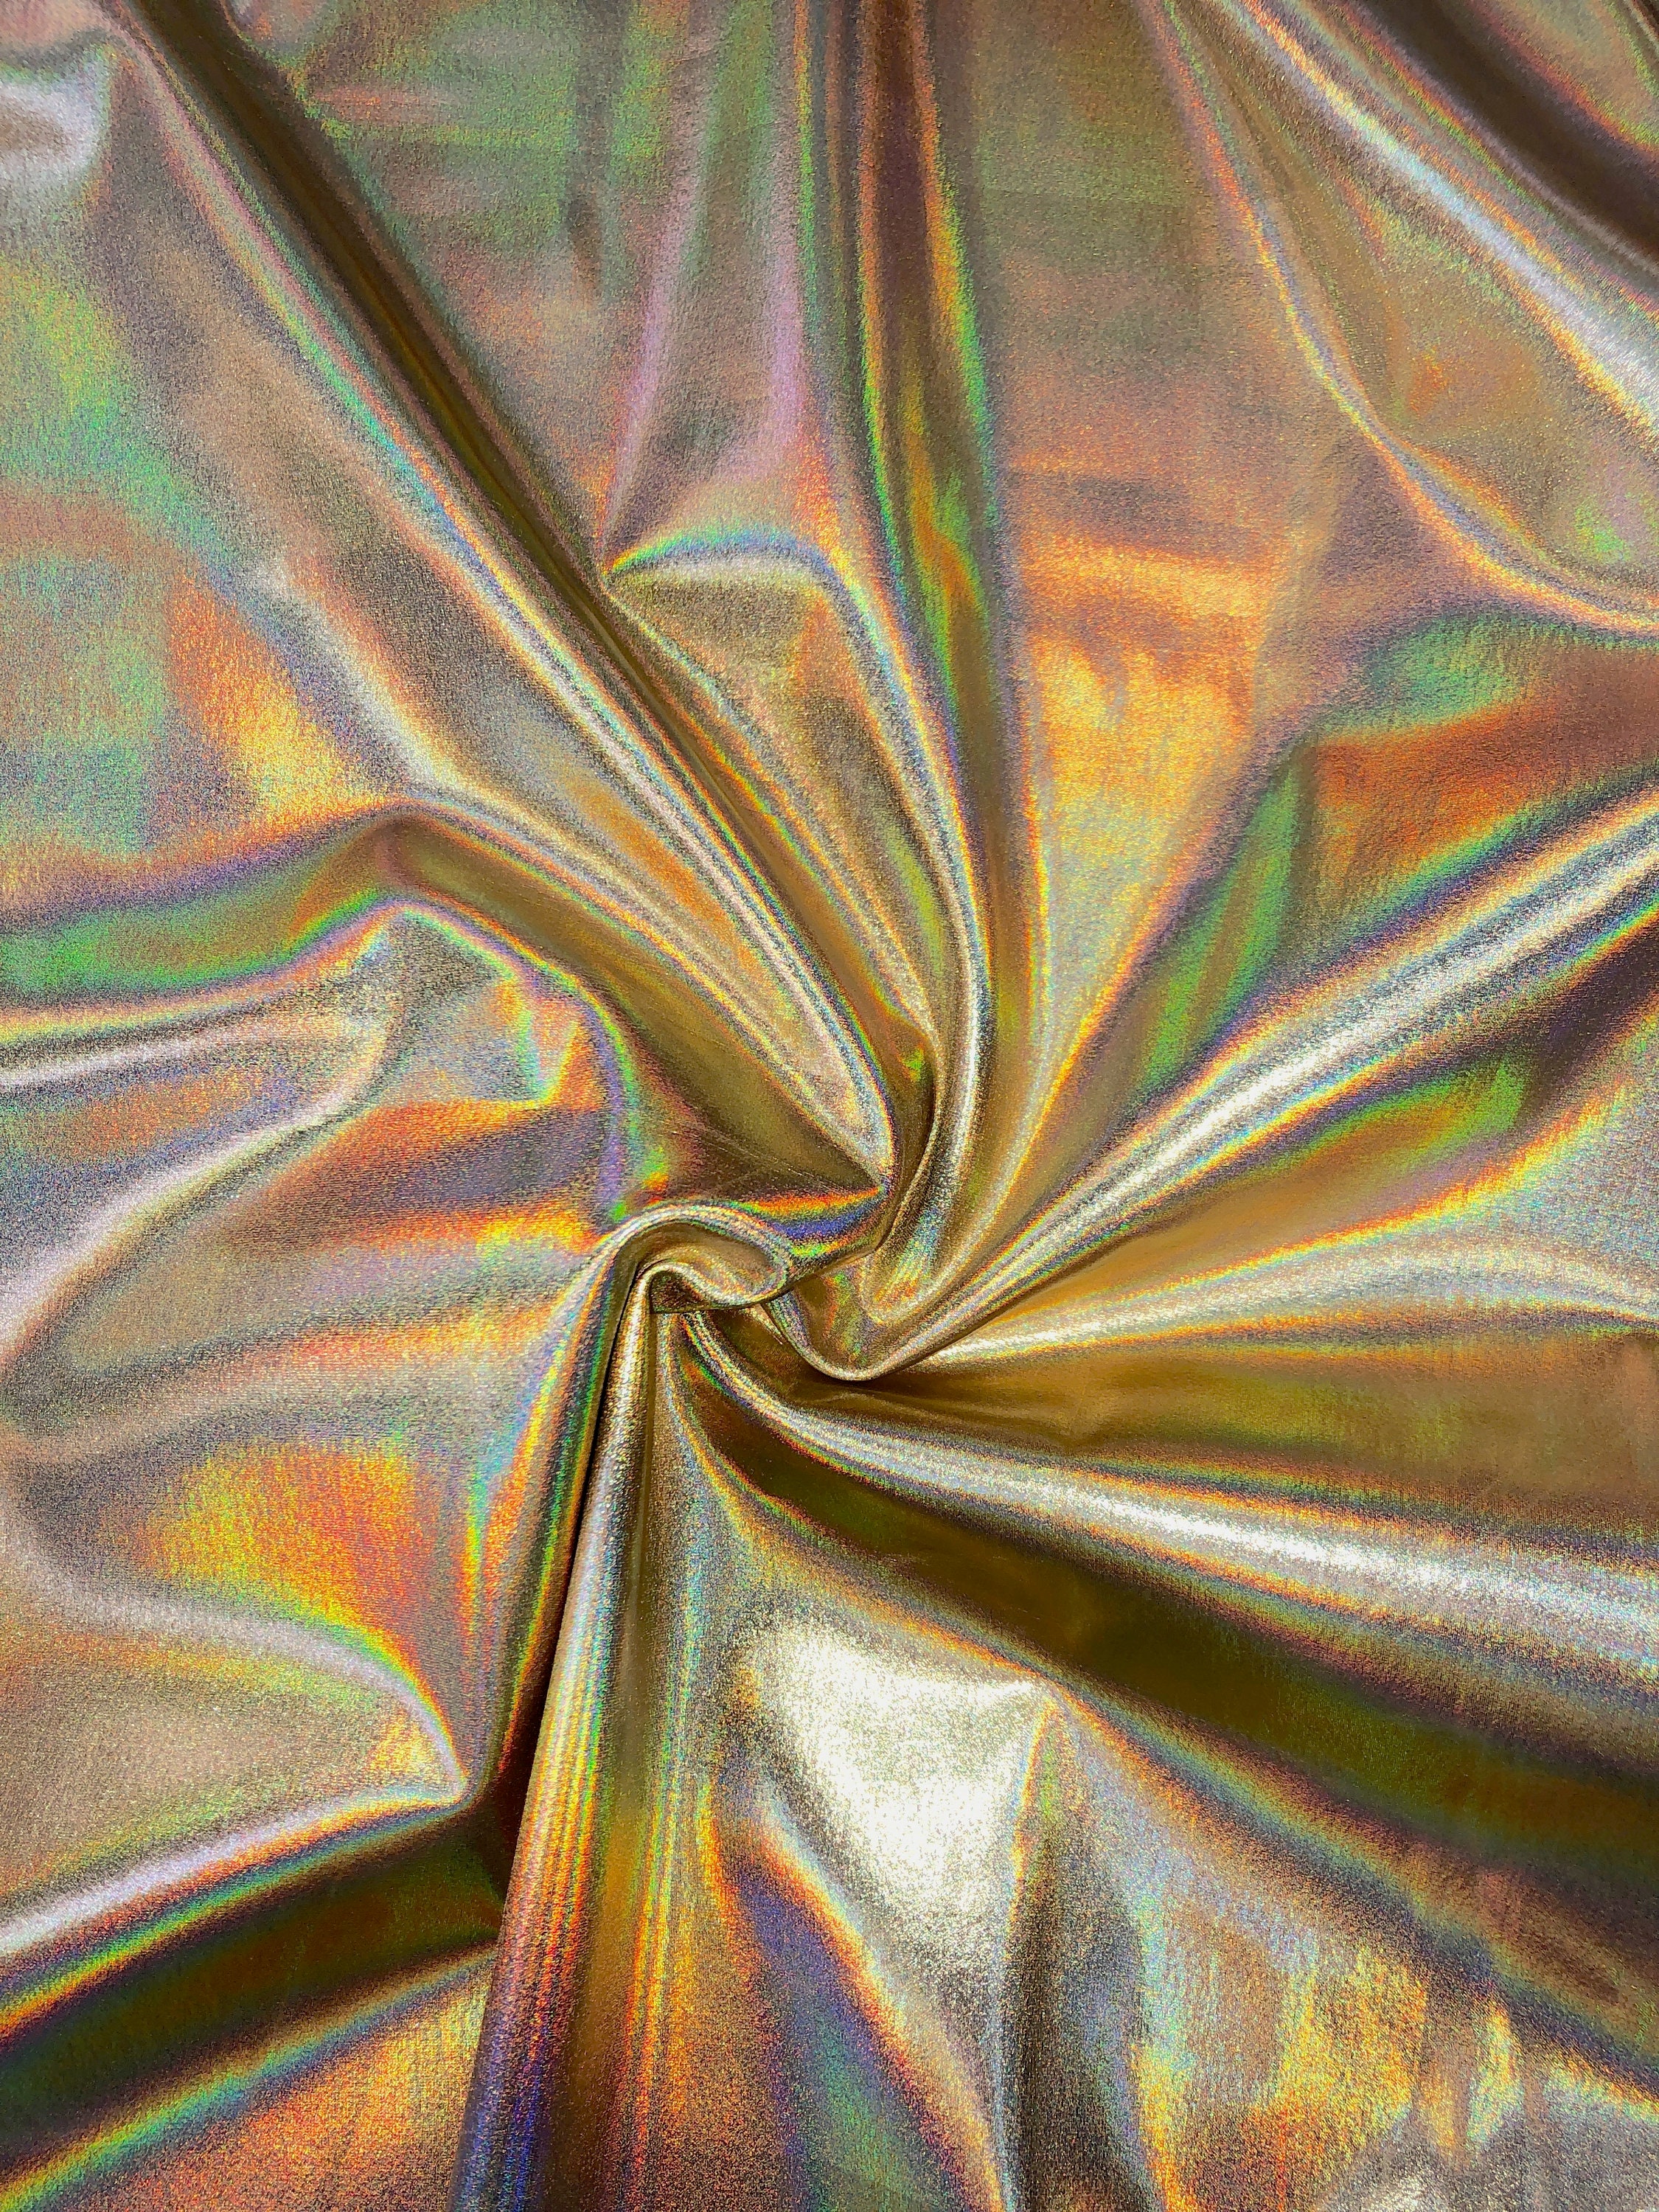 Gold Opal Holographic Nylon Spandex Fabric by-the-yard– Peridot